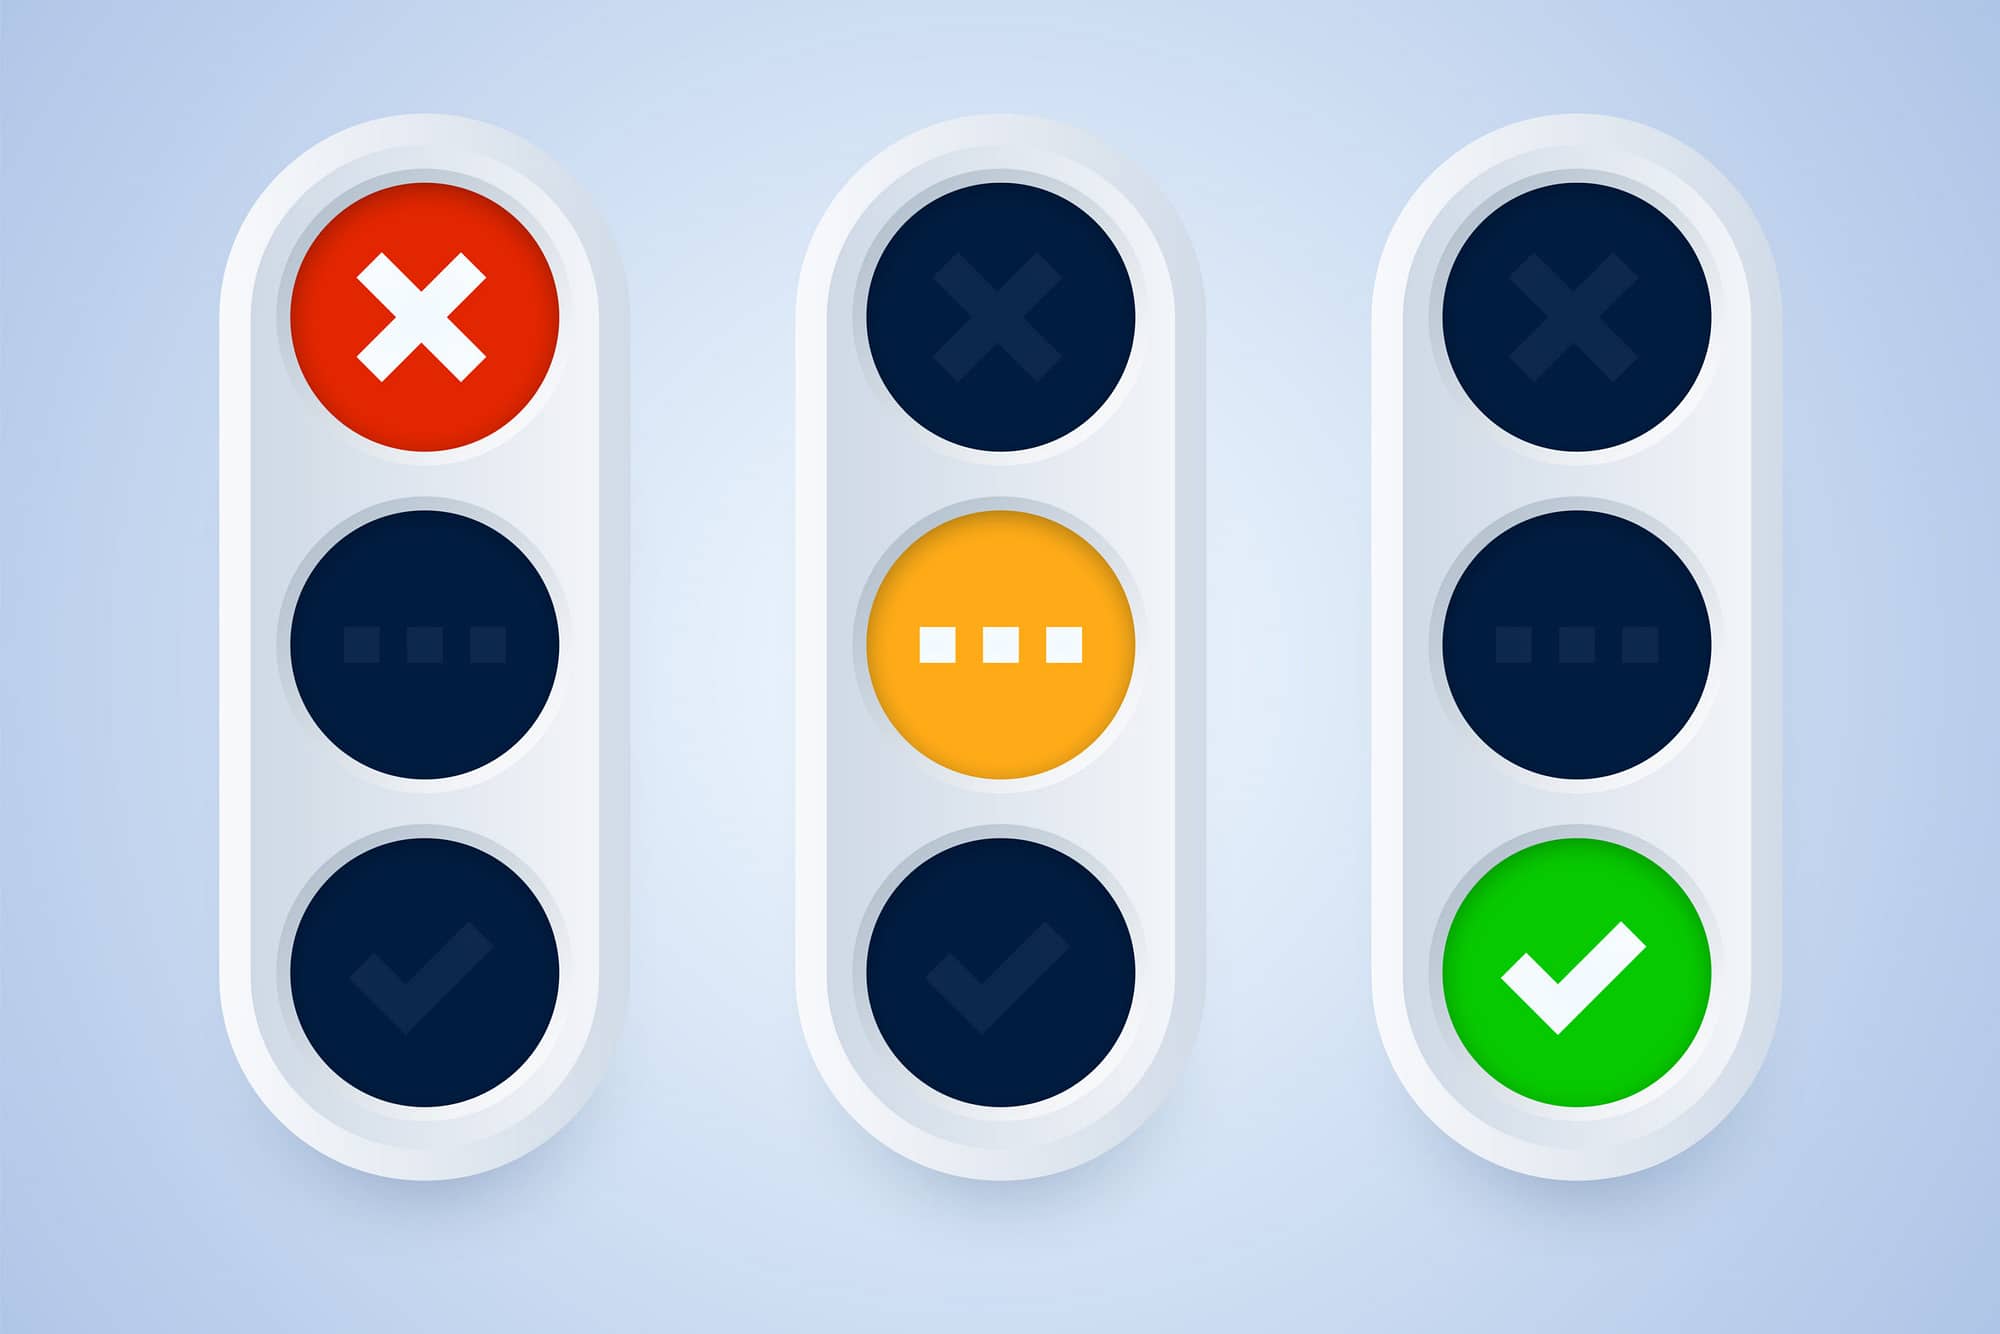 Traffic light signs in 3d style. Vector illustration.